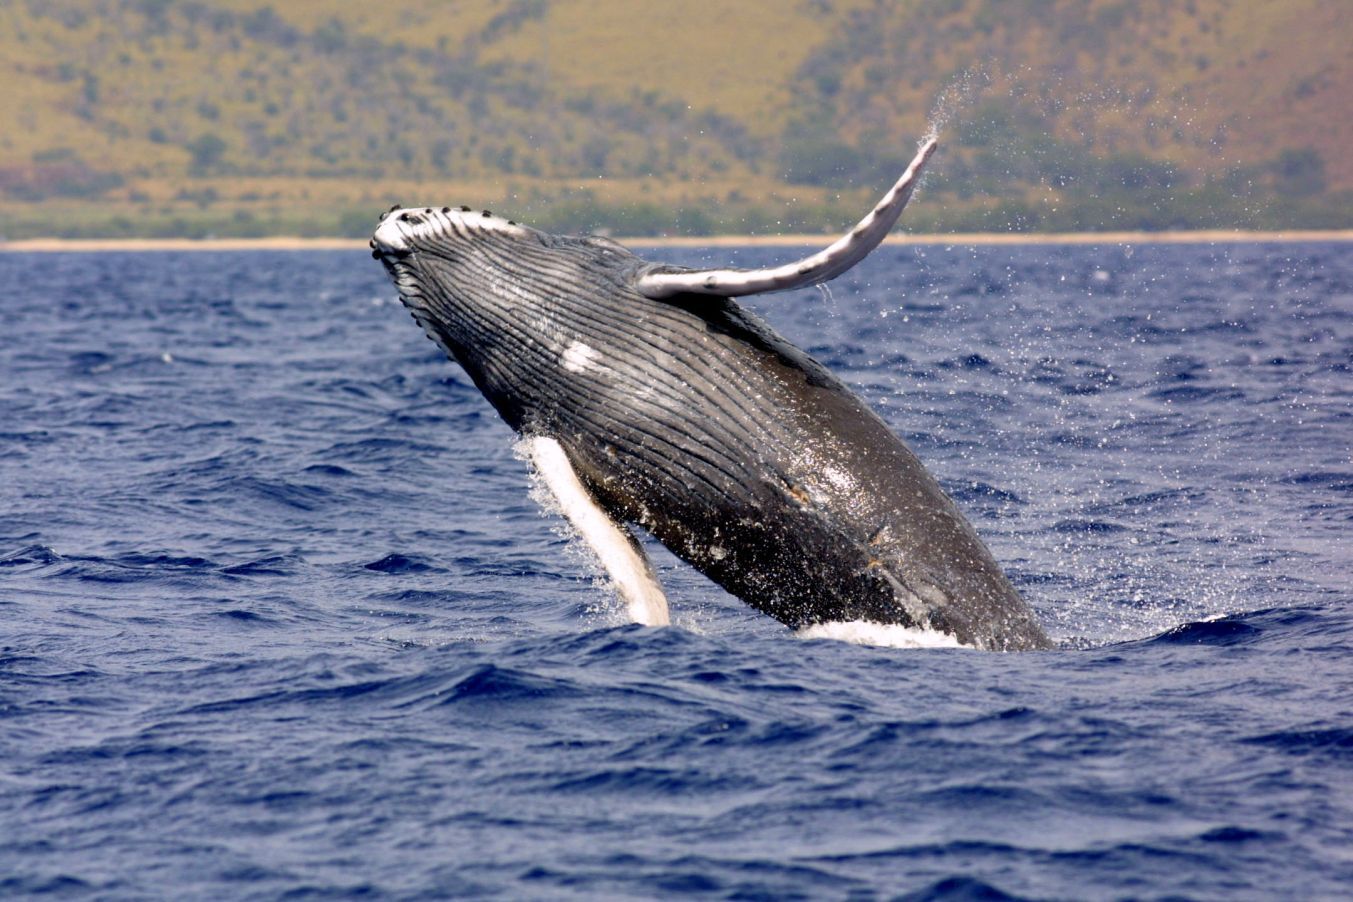 The Association — Pacific Whale Watch Association